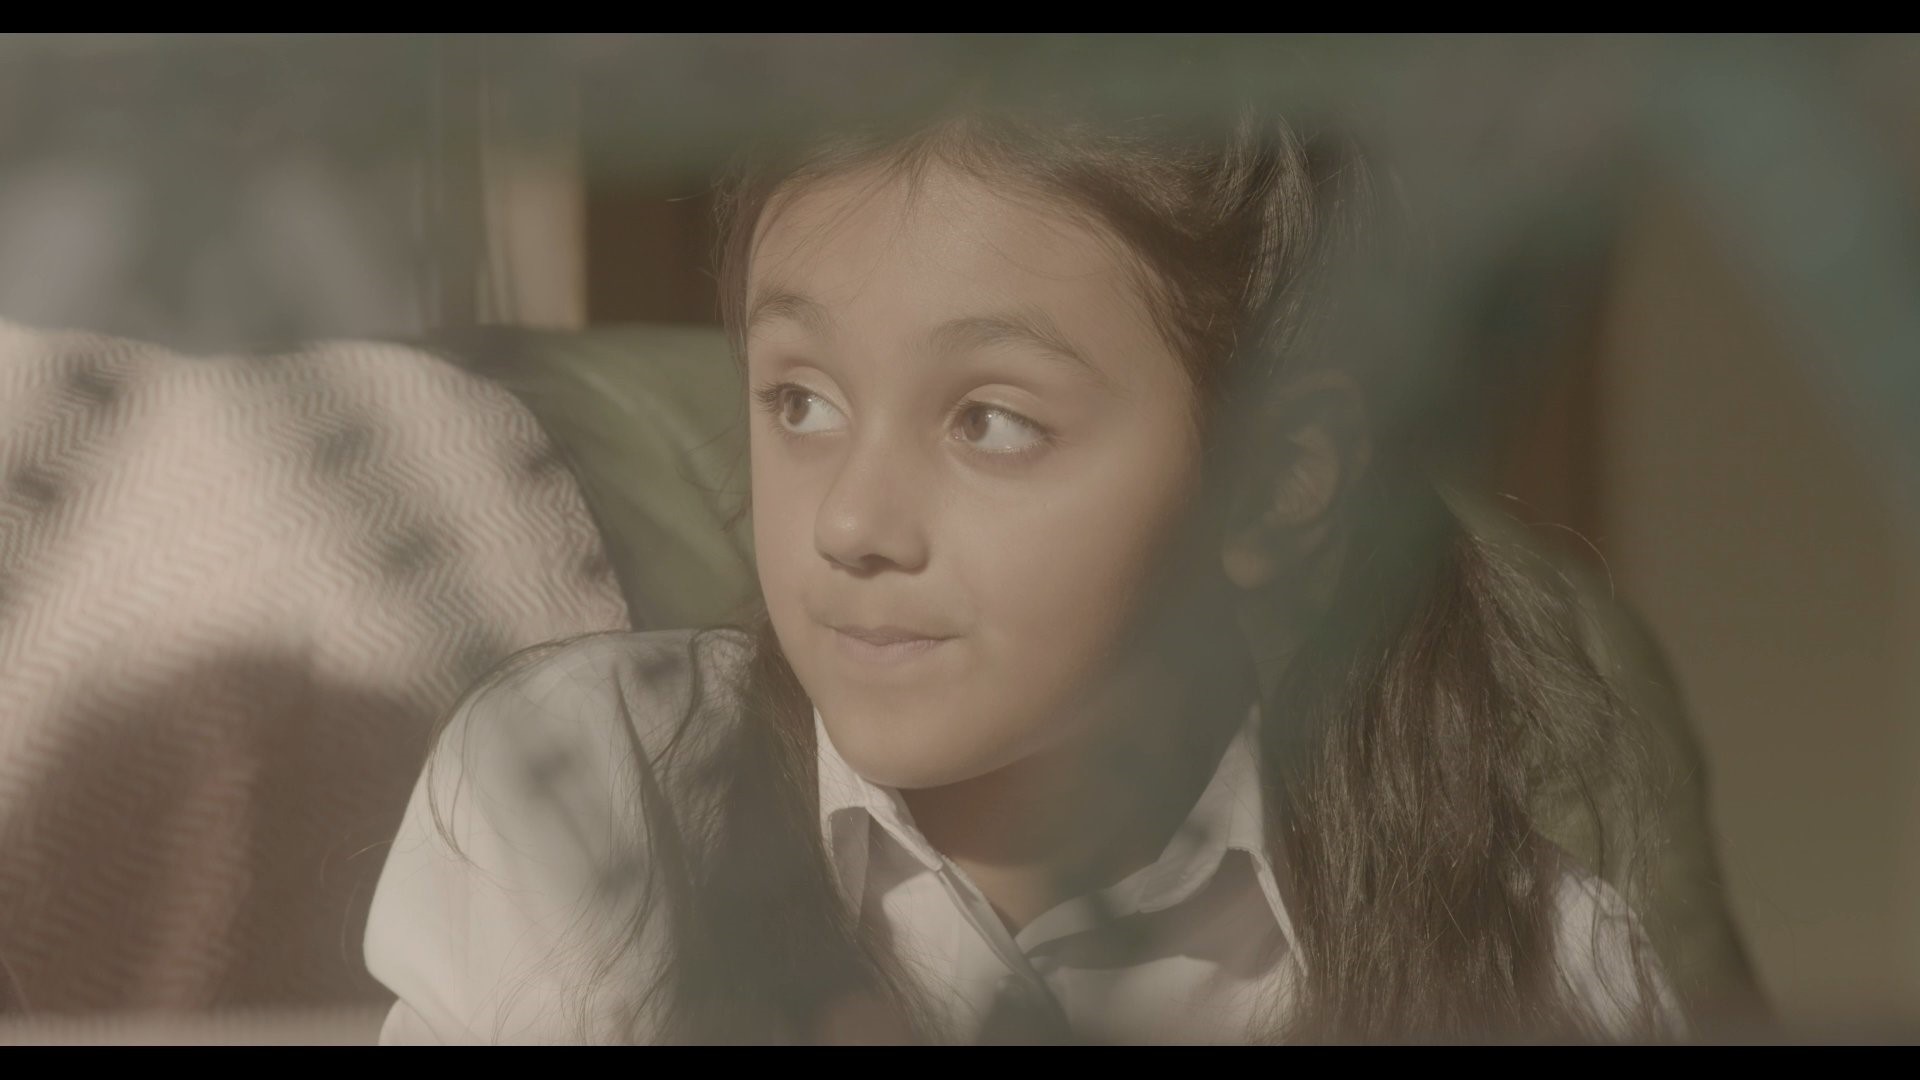 a film screen shot of a little girl looking to the side